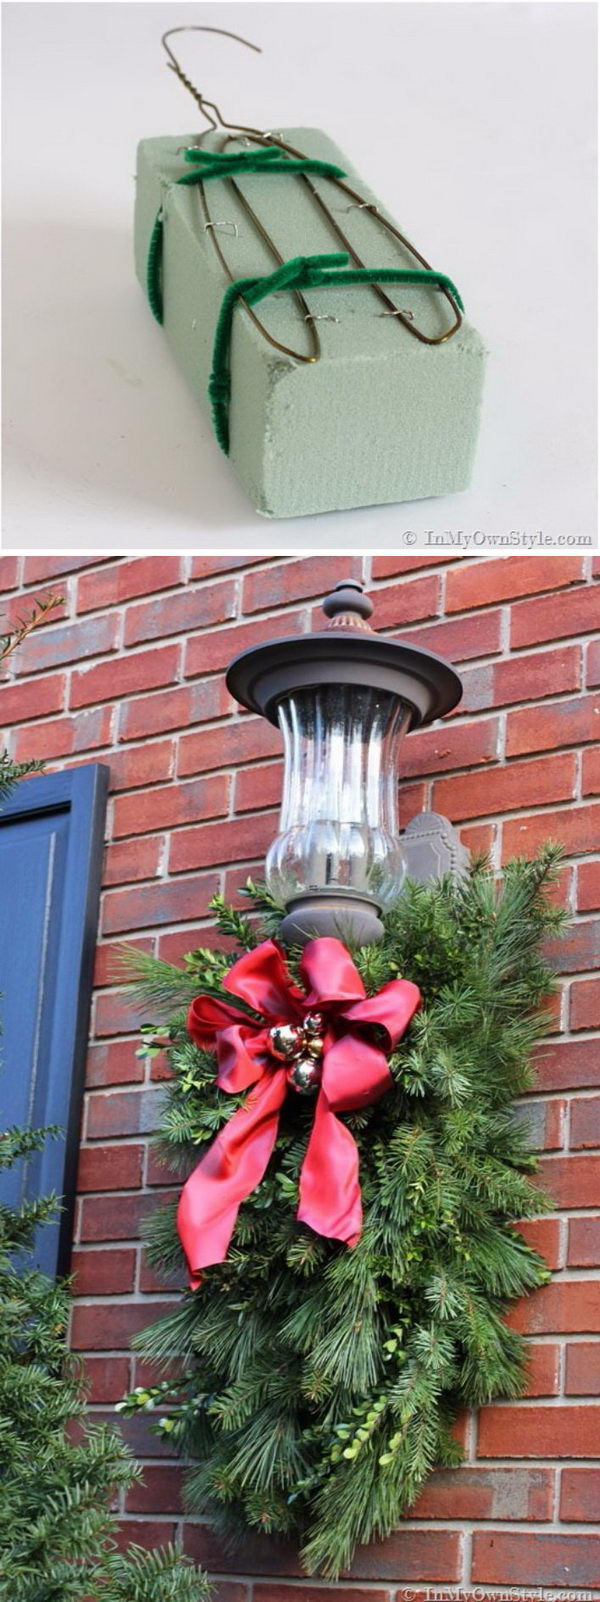 Christmas Ideas For Outside
 40 Festive Outdoor Christmas Decorations